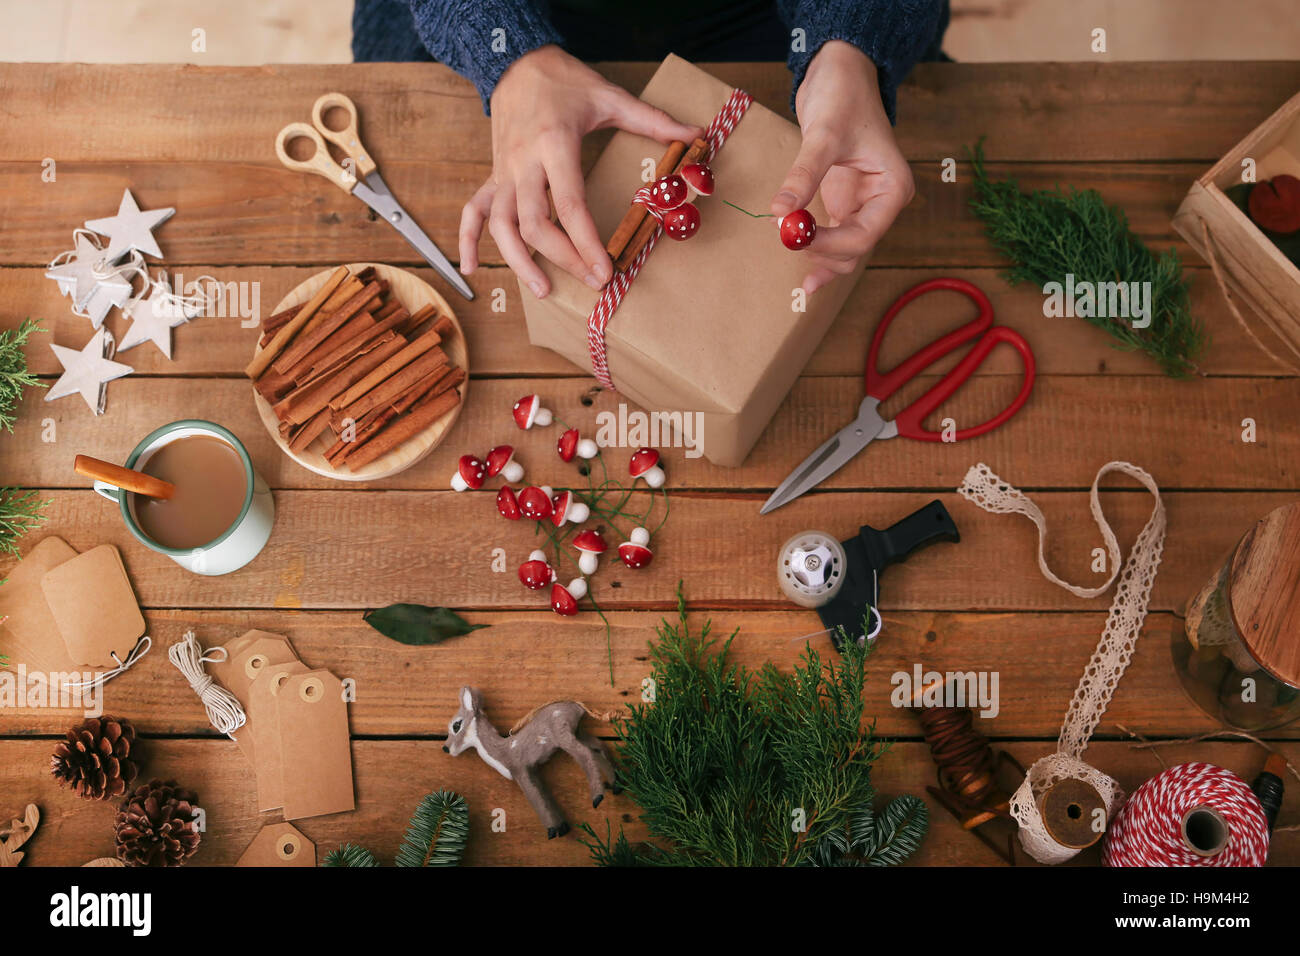 Woman's hands decorating Christmas present Stock Photo